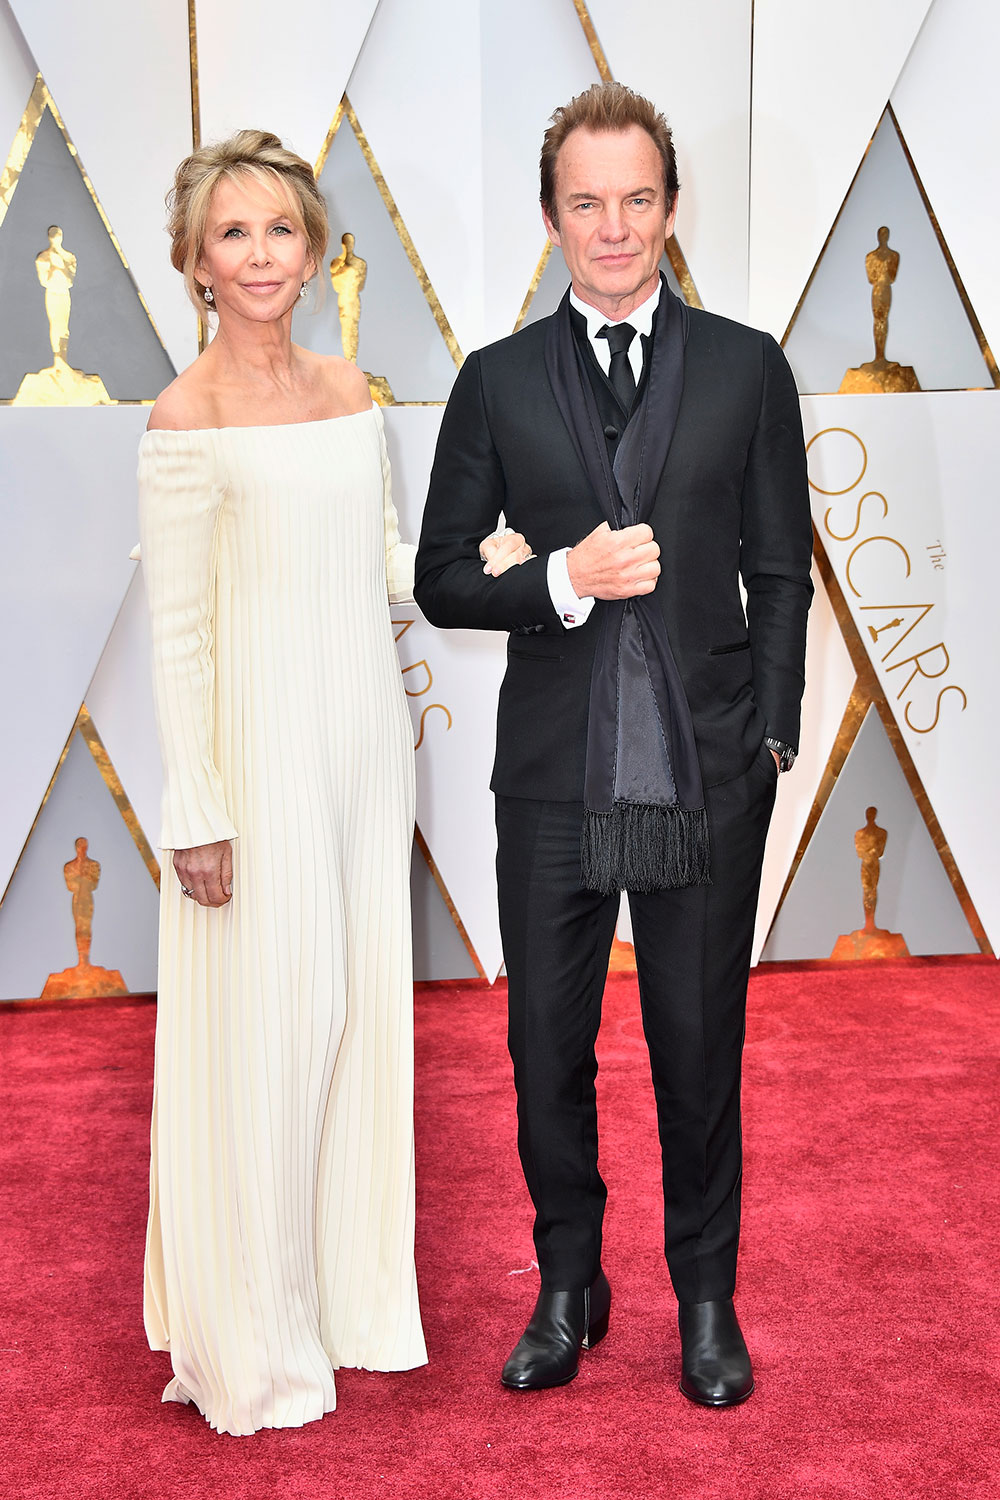 Trudie Styler and Sting.